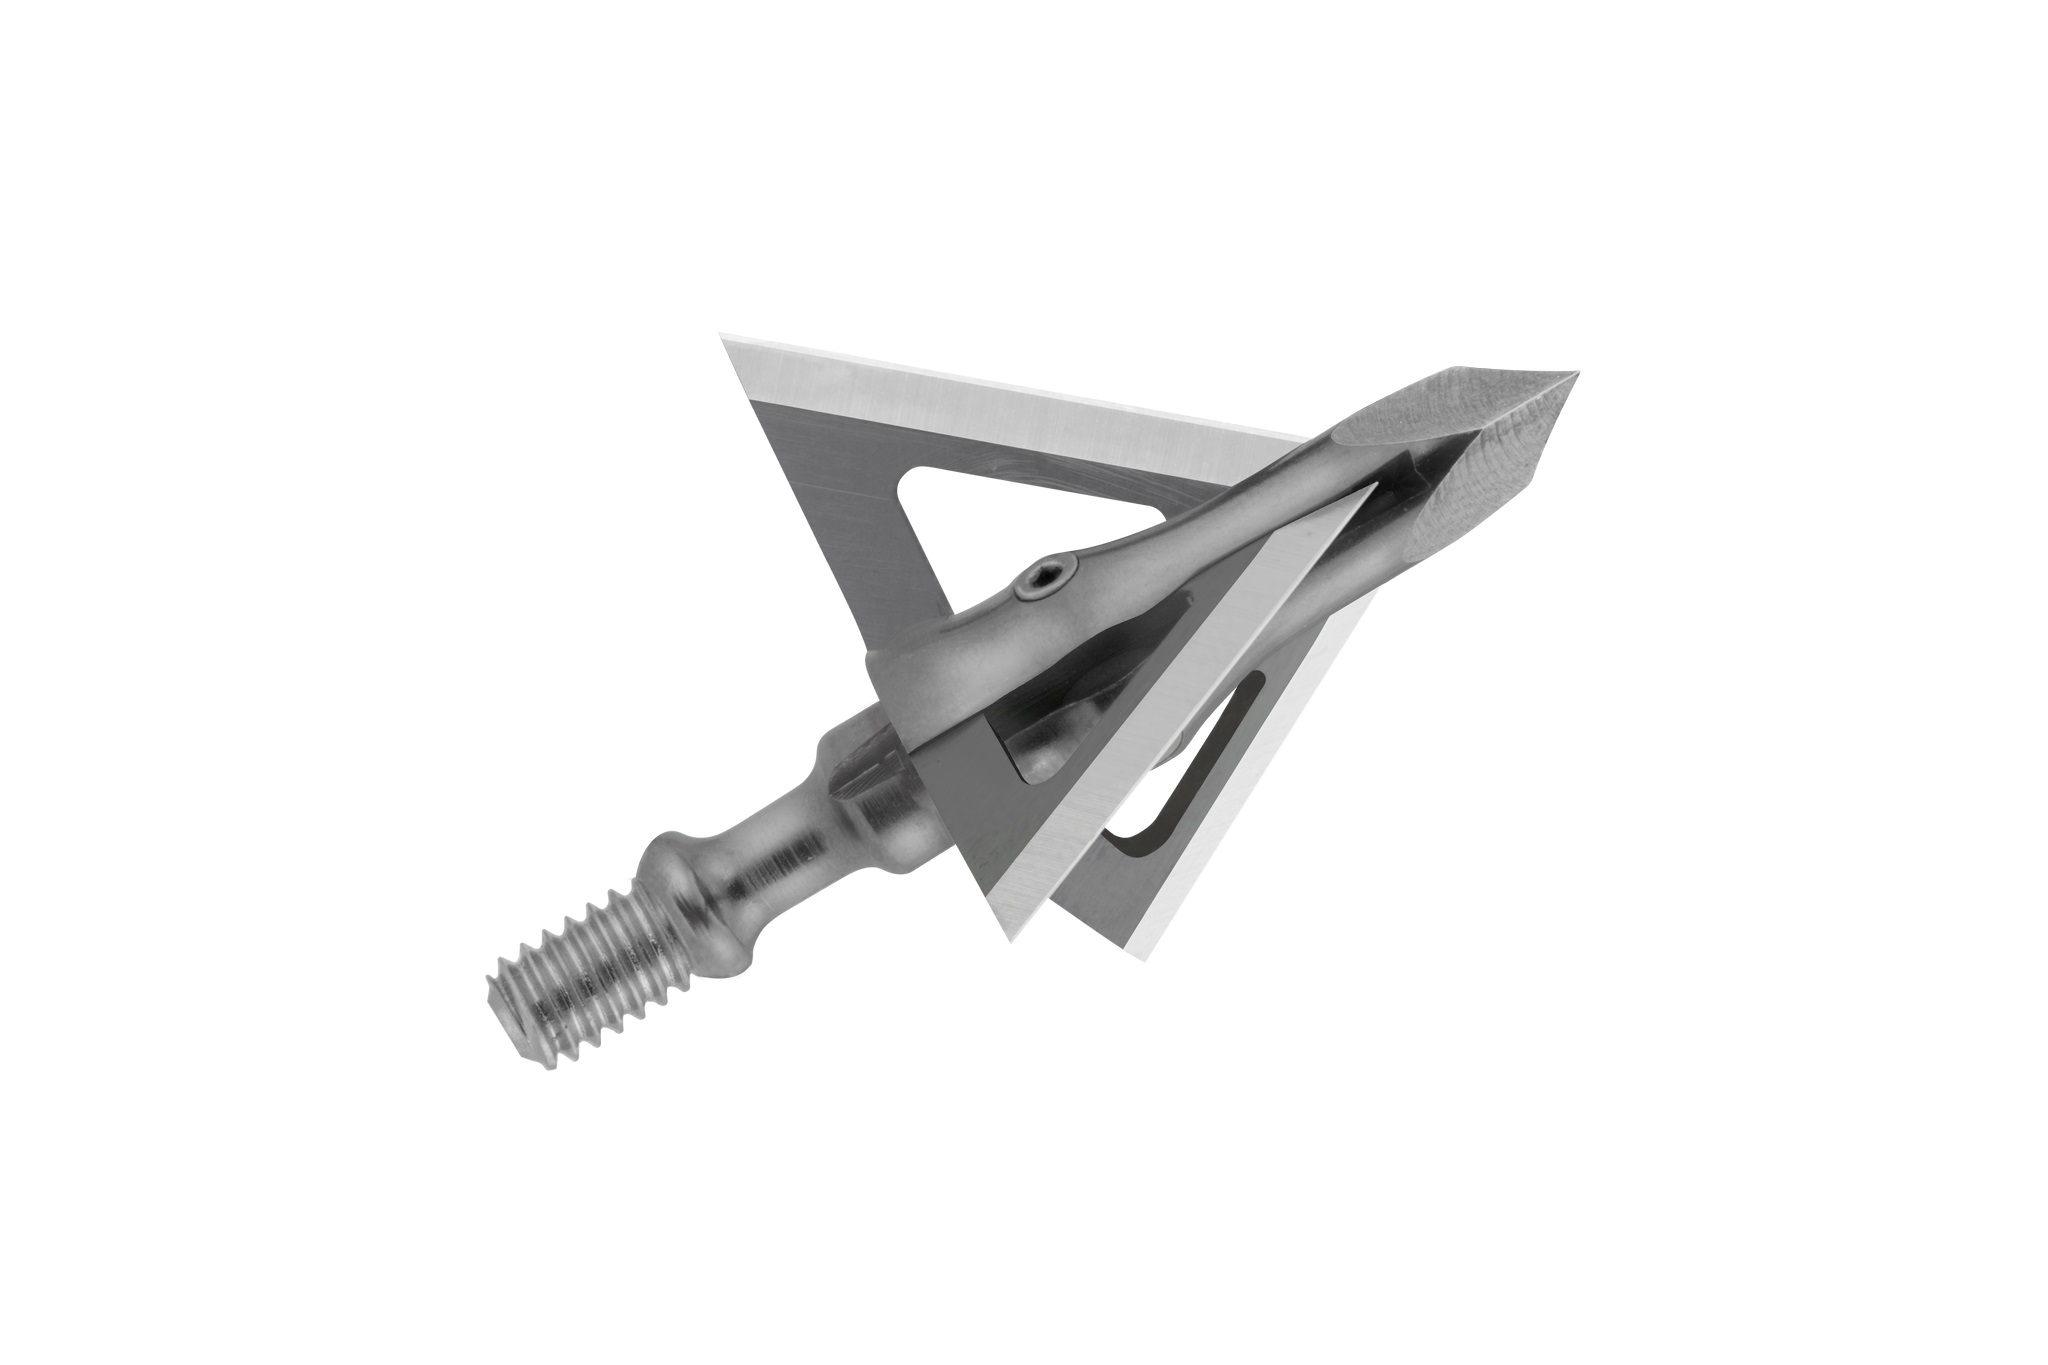 Muzzy Trocar Crossbow Broadhead  Up to 32% Off 4 Star Rating Free Shipping  over $49!